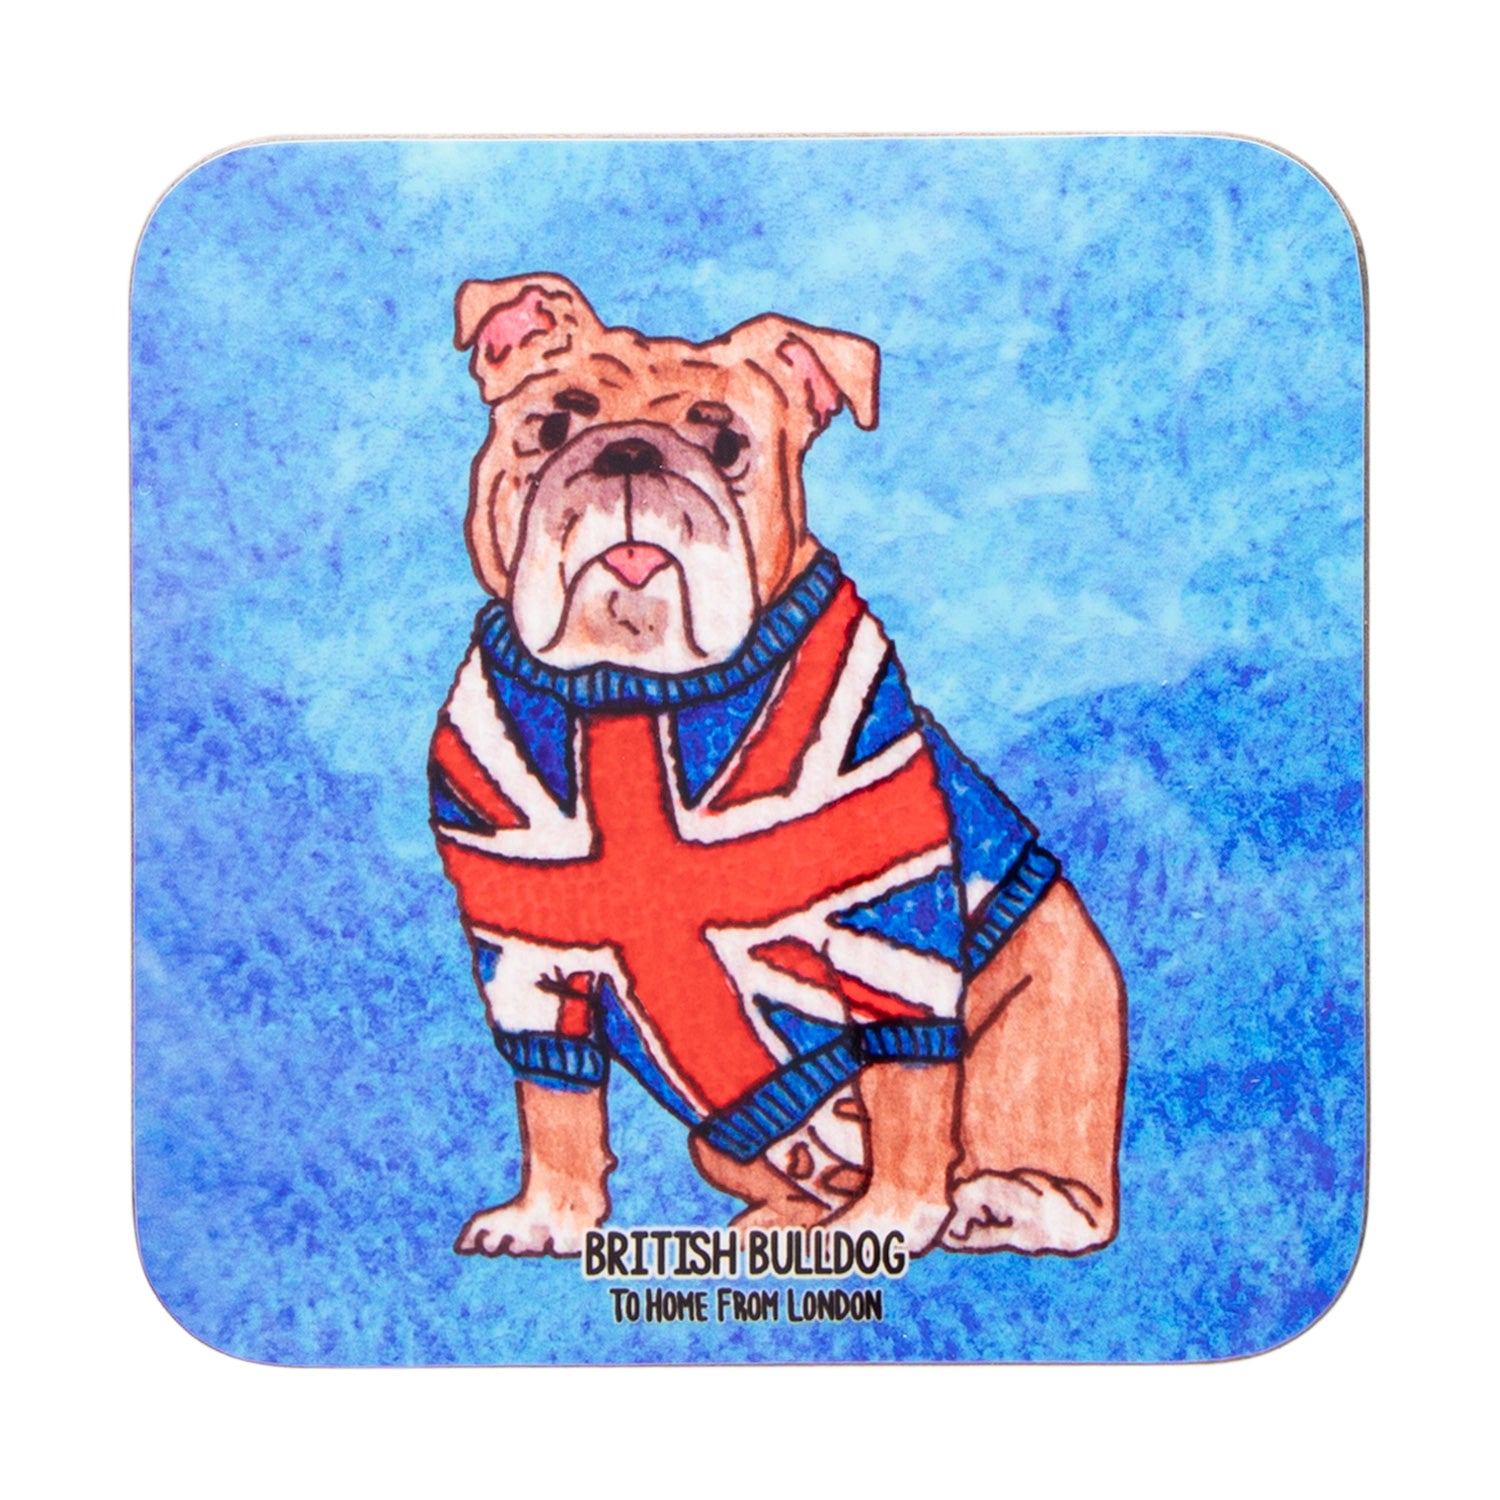 To Home From London Magnetic Coaster - Bulldog